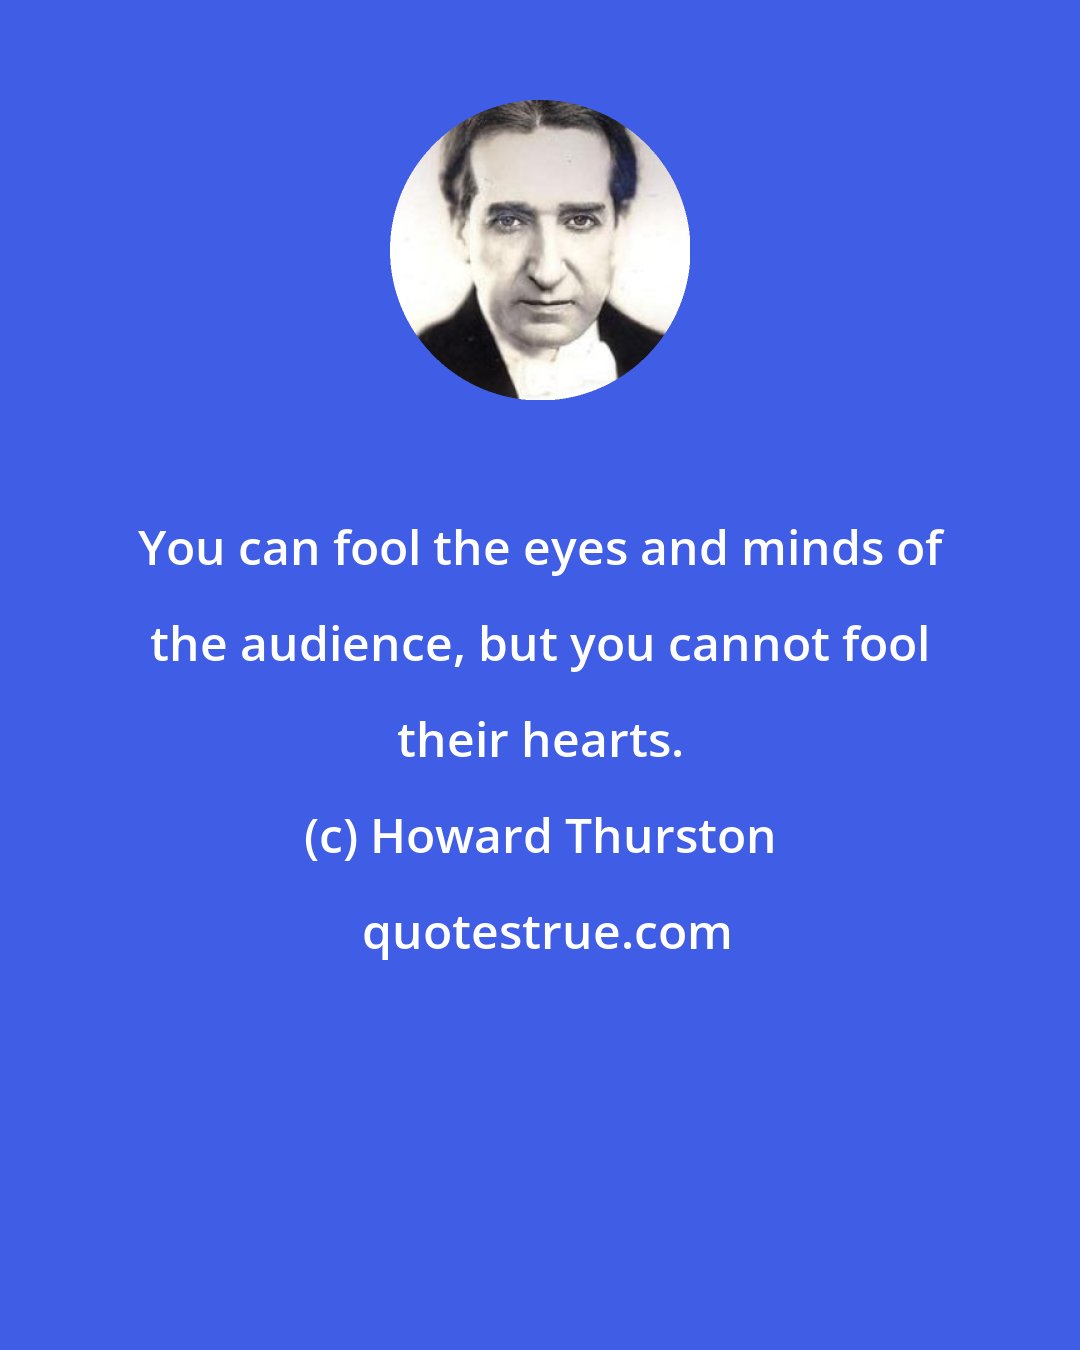 Howard Thurston: You can fool the eyes and minds of the audience, but you cannot fool their hearts.